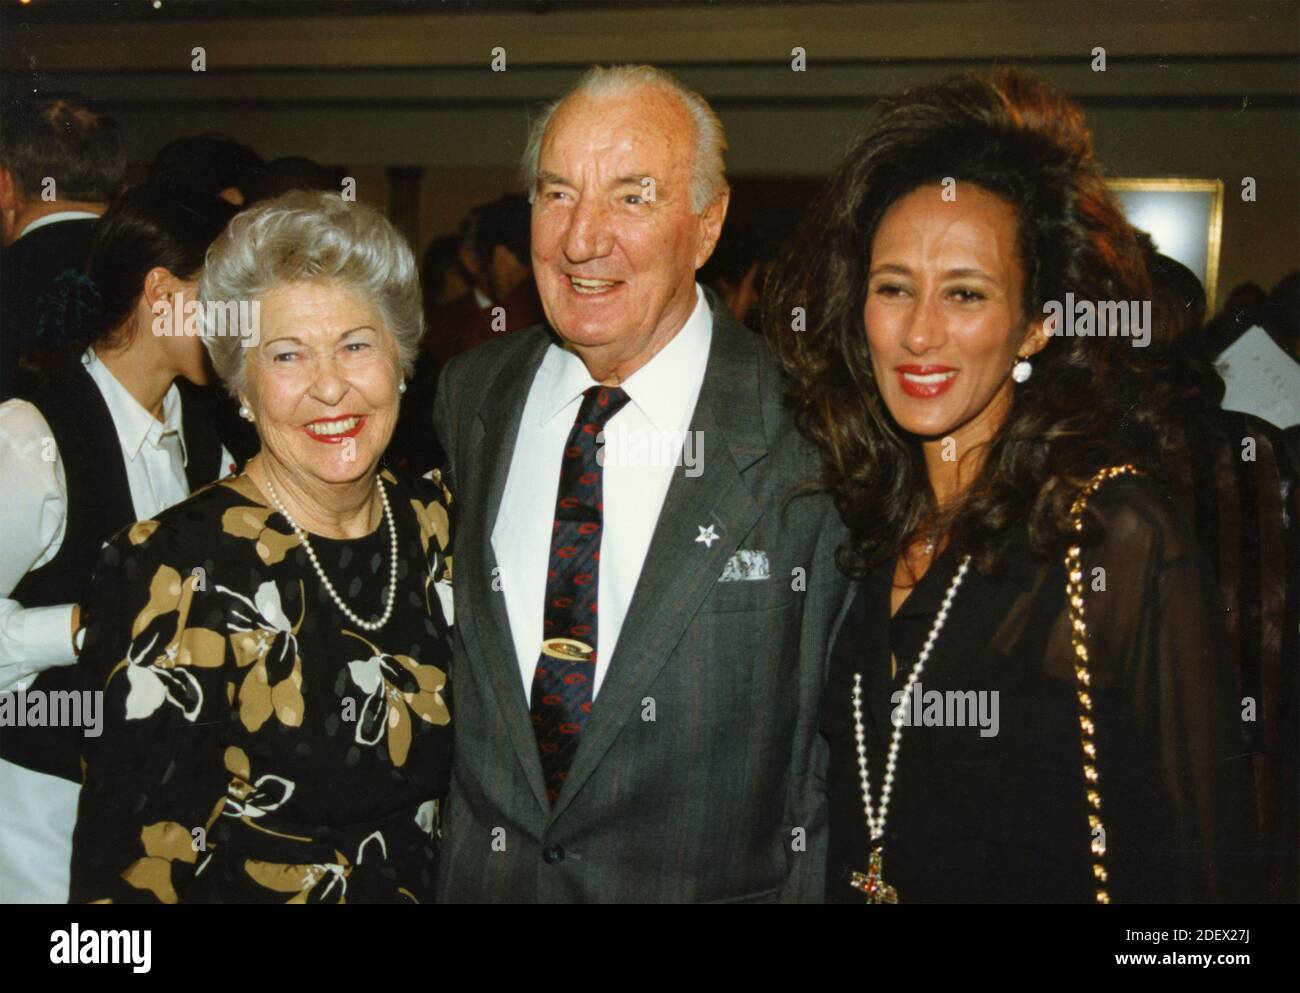 British former tennis player Fred Perry and his wife Barbara Reise and  daughter Penny, 1990s Stock Photo - Alamy